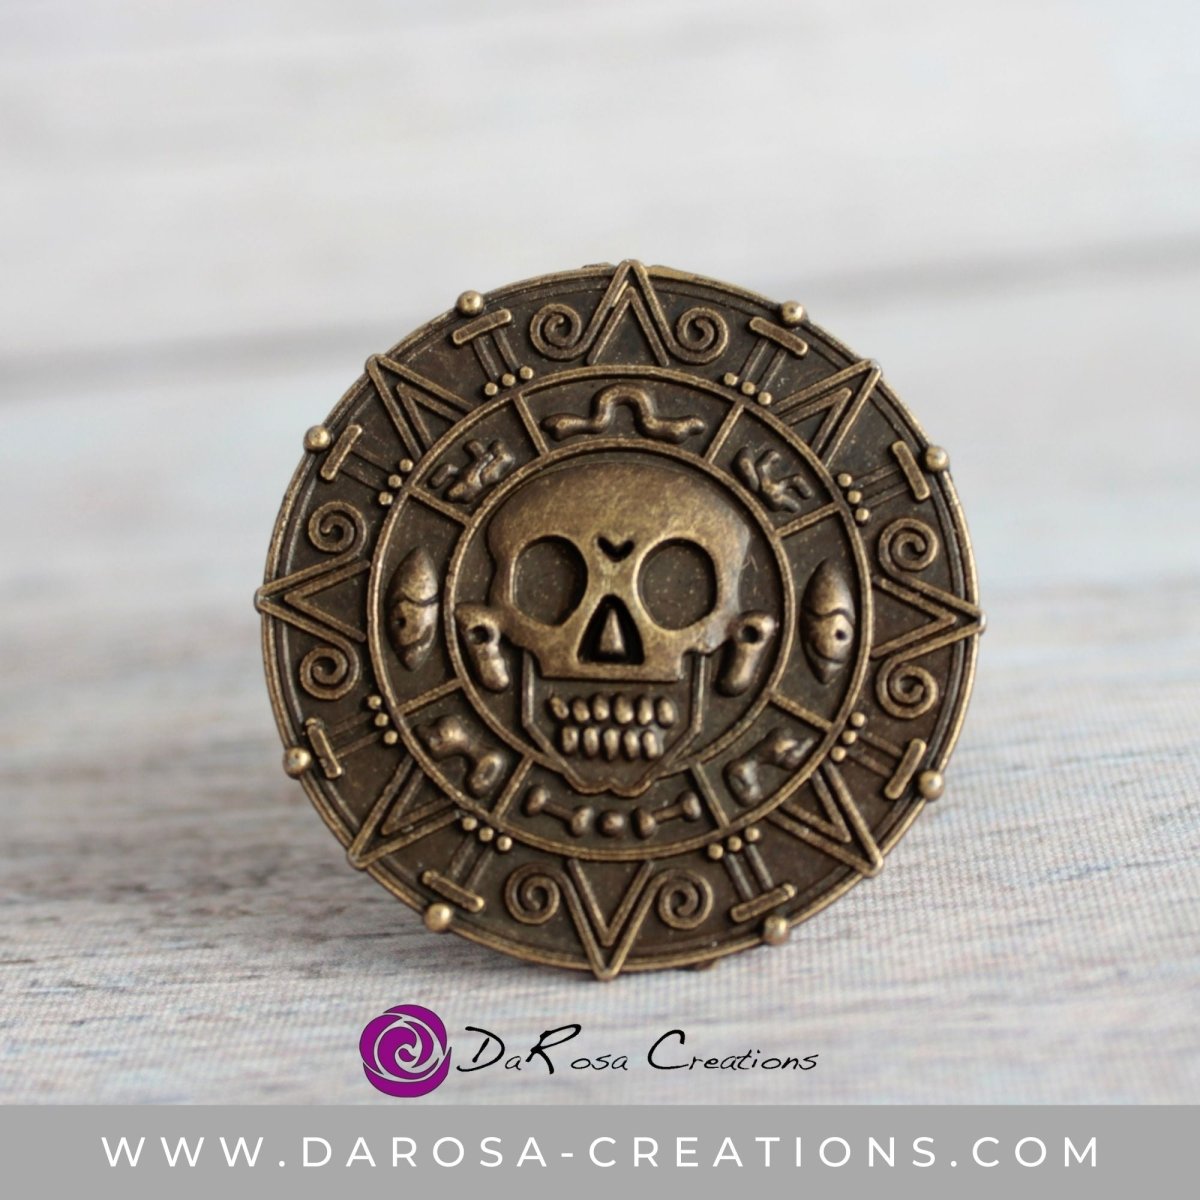 Pirate Skull Drawer Knob in Silver or Brass - DaRosa Creations